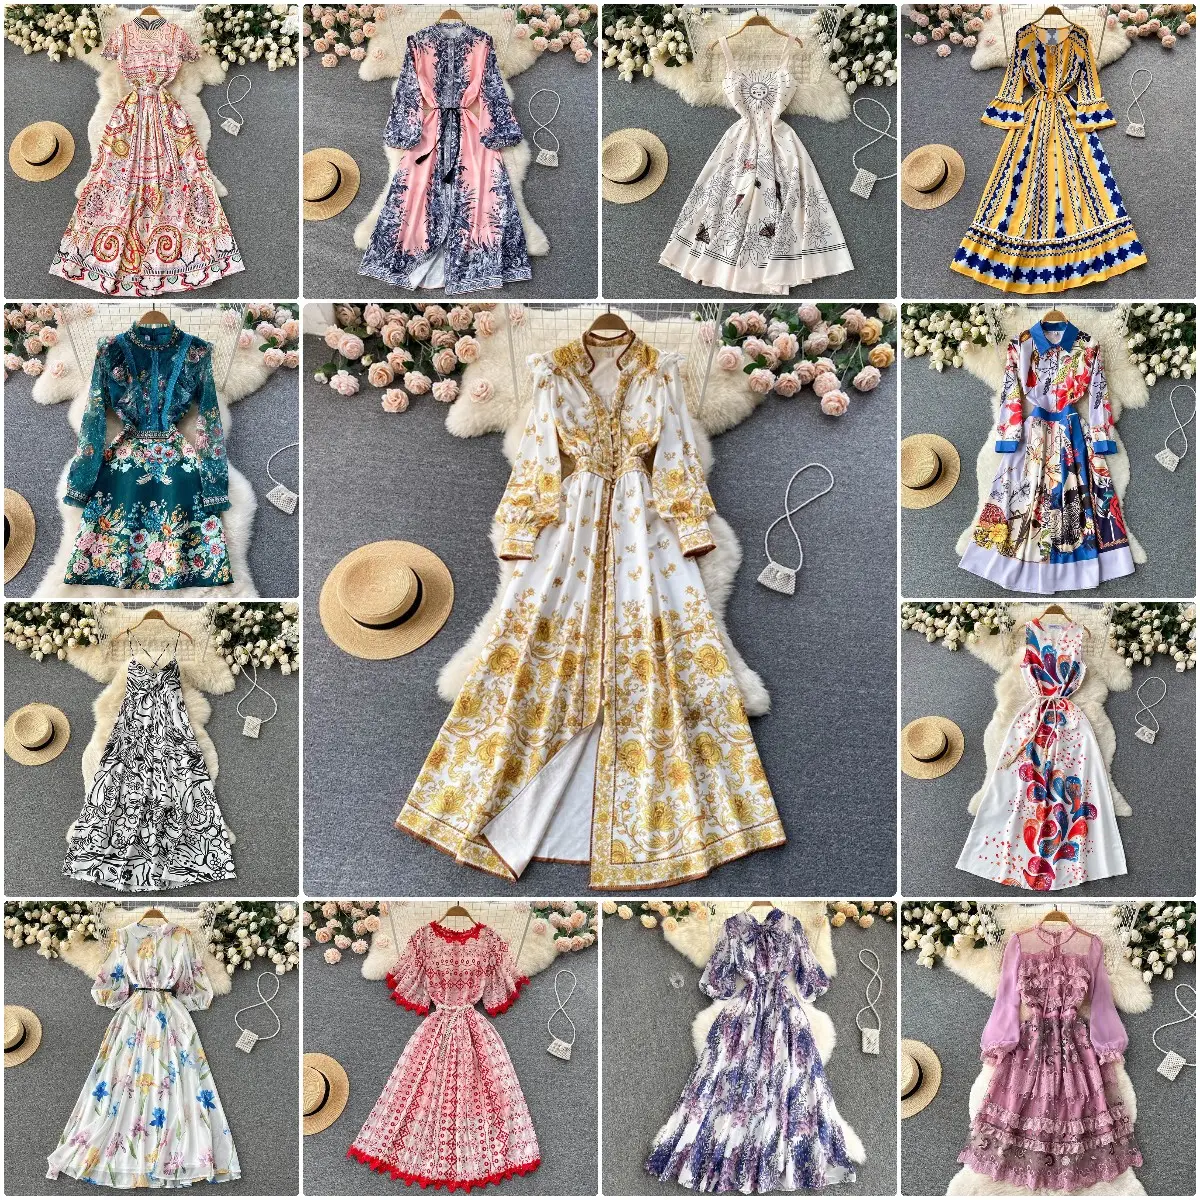 Large size women's dress 2022 new European and American high-end dress design sense printed dress production factory wholesale